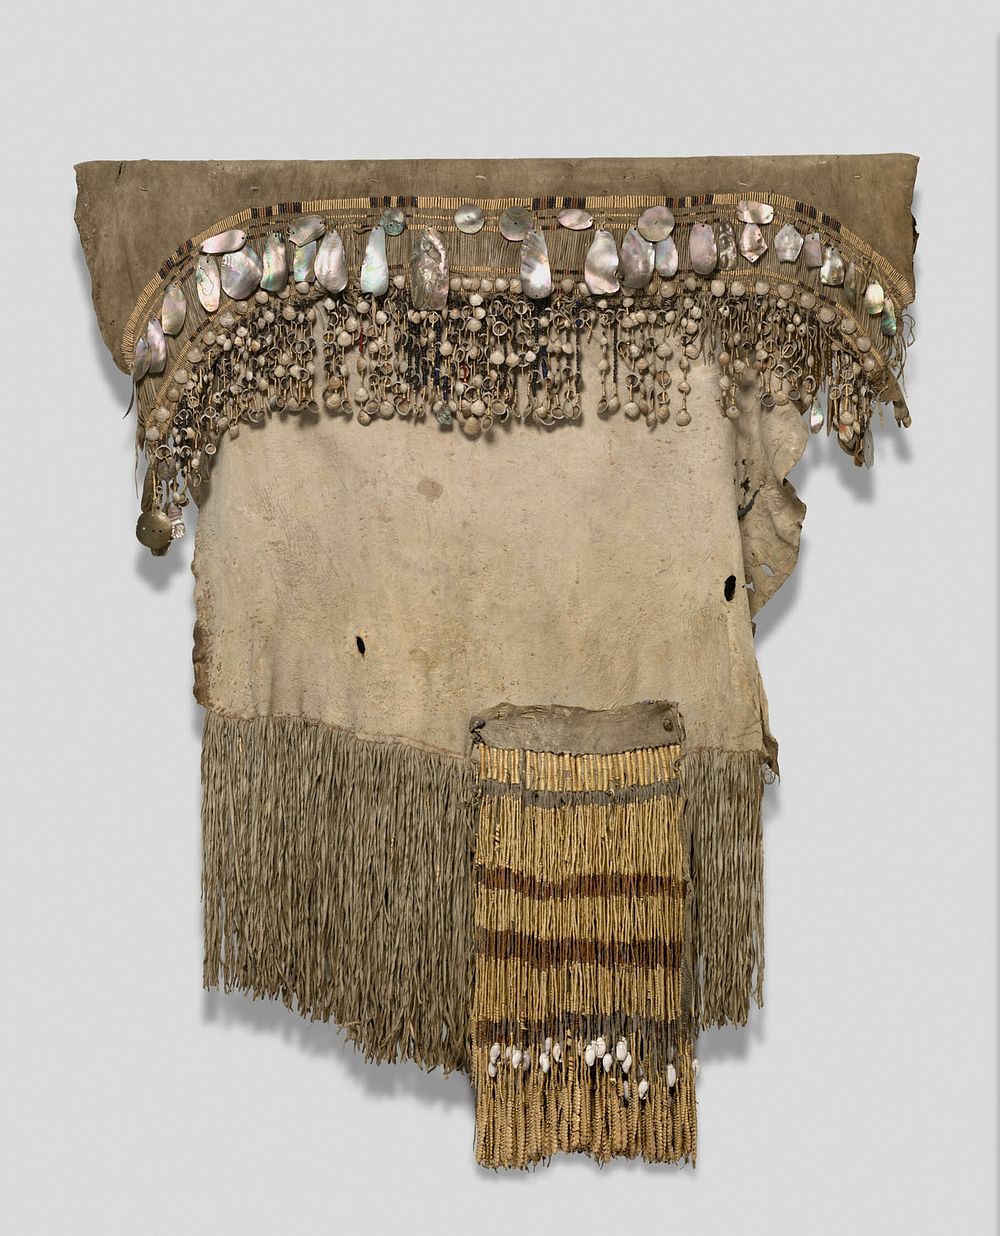 Dance Skirt (photographed with Apron) by Yurok